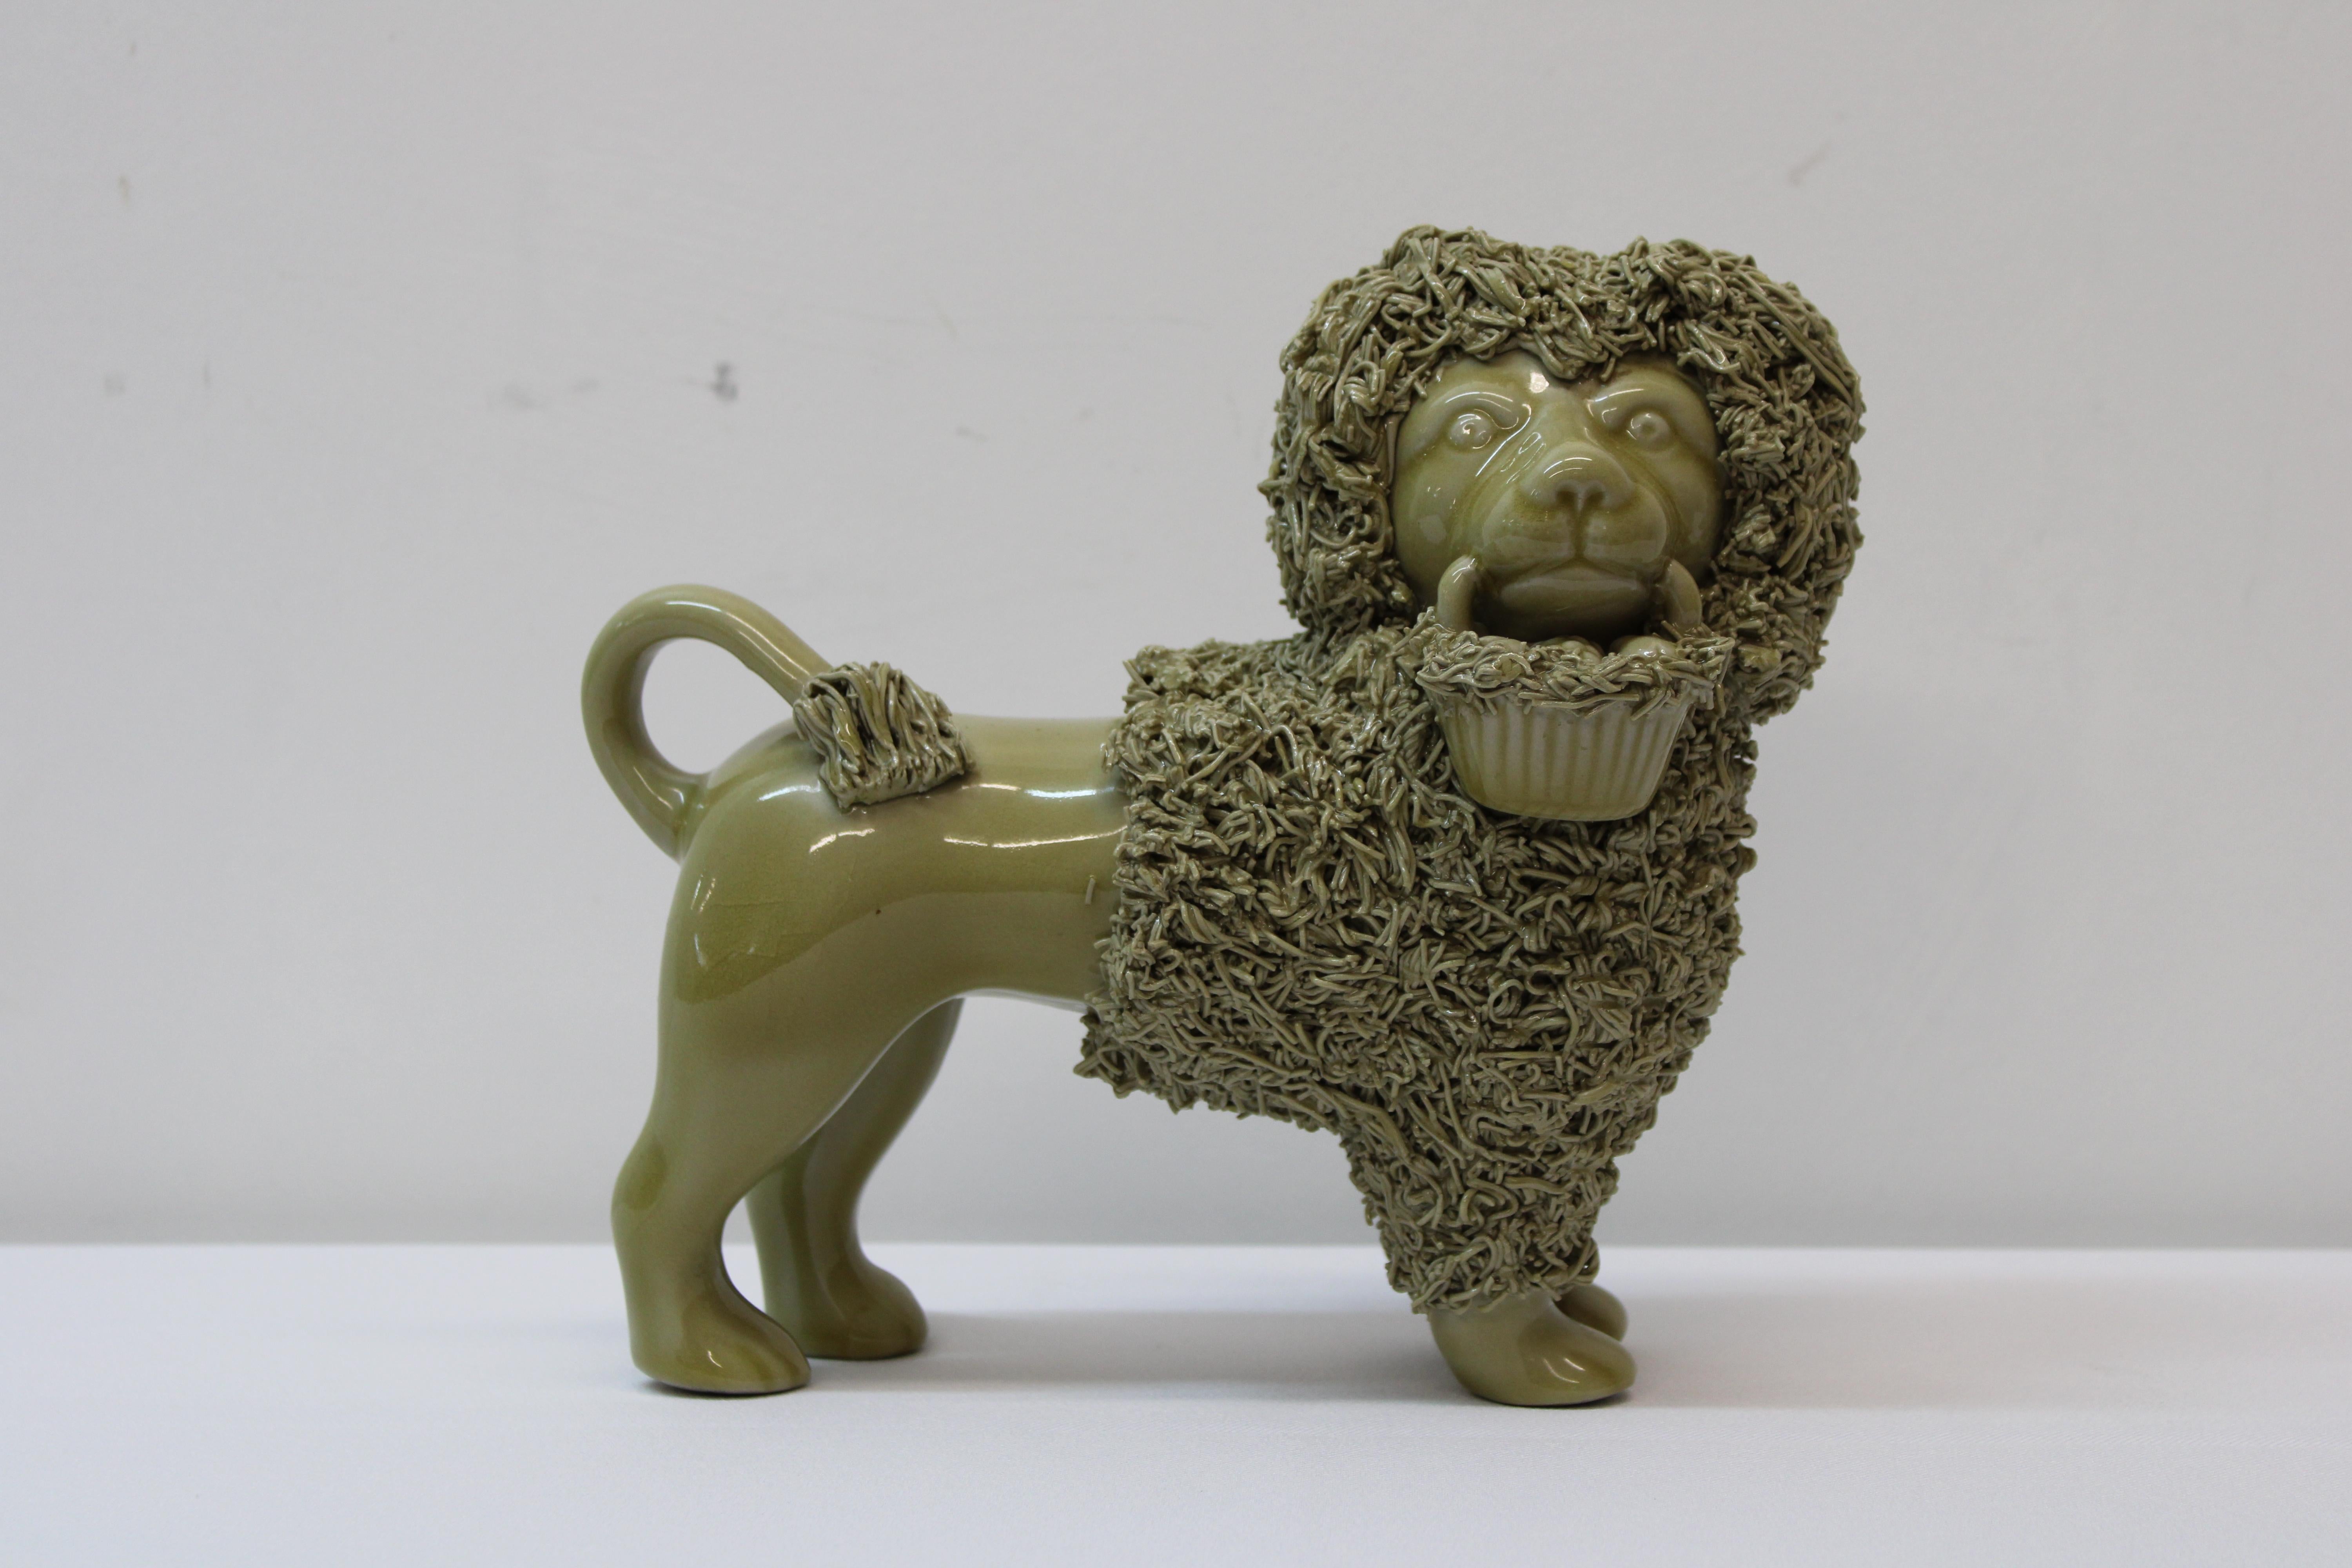 19th century - pair of Bennington Pottery lions holding baskets in their mouths.
(Unmarked) in excellent condition.